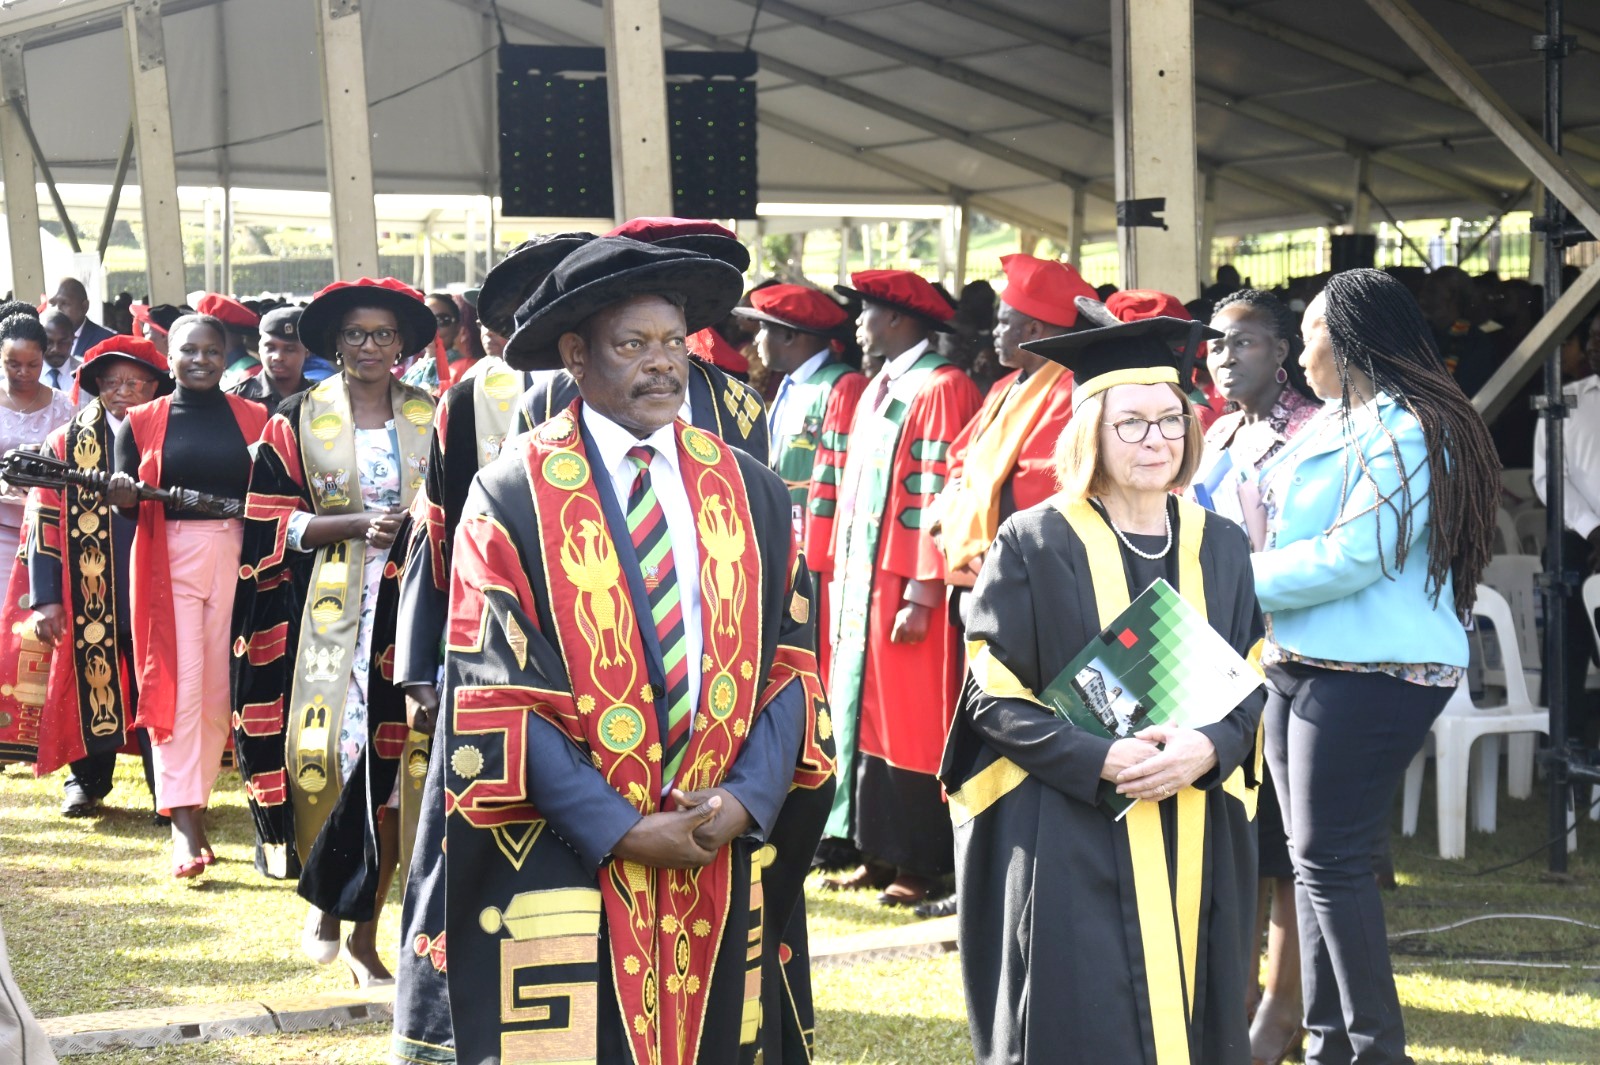 The Vice Chancellor, Prof. Barnabas Nawangwe (2nd R) and Vice-Chancellor University of London, Prof. Wendy Thomson (R) with members of the University leadership as the Procession makes its way through the Freedom Square on Day 1 of the 73rd Graduation Ceremony on 13th February 2022.